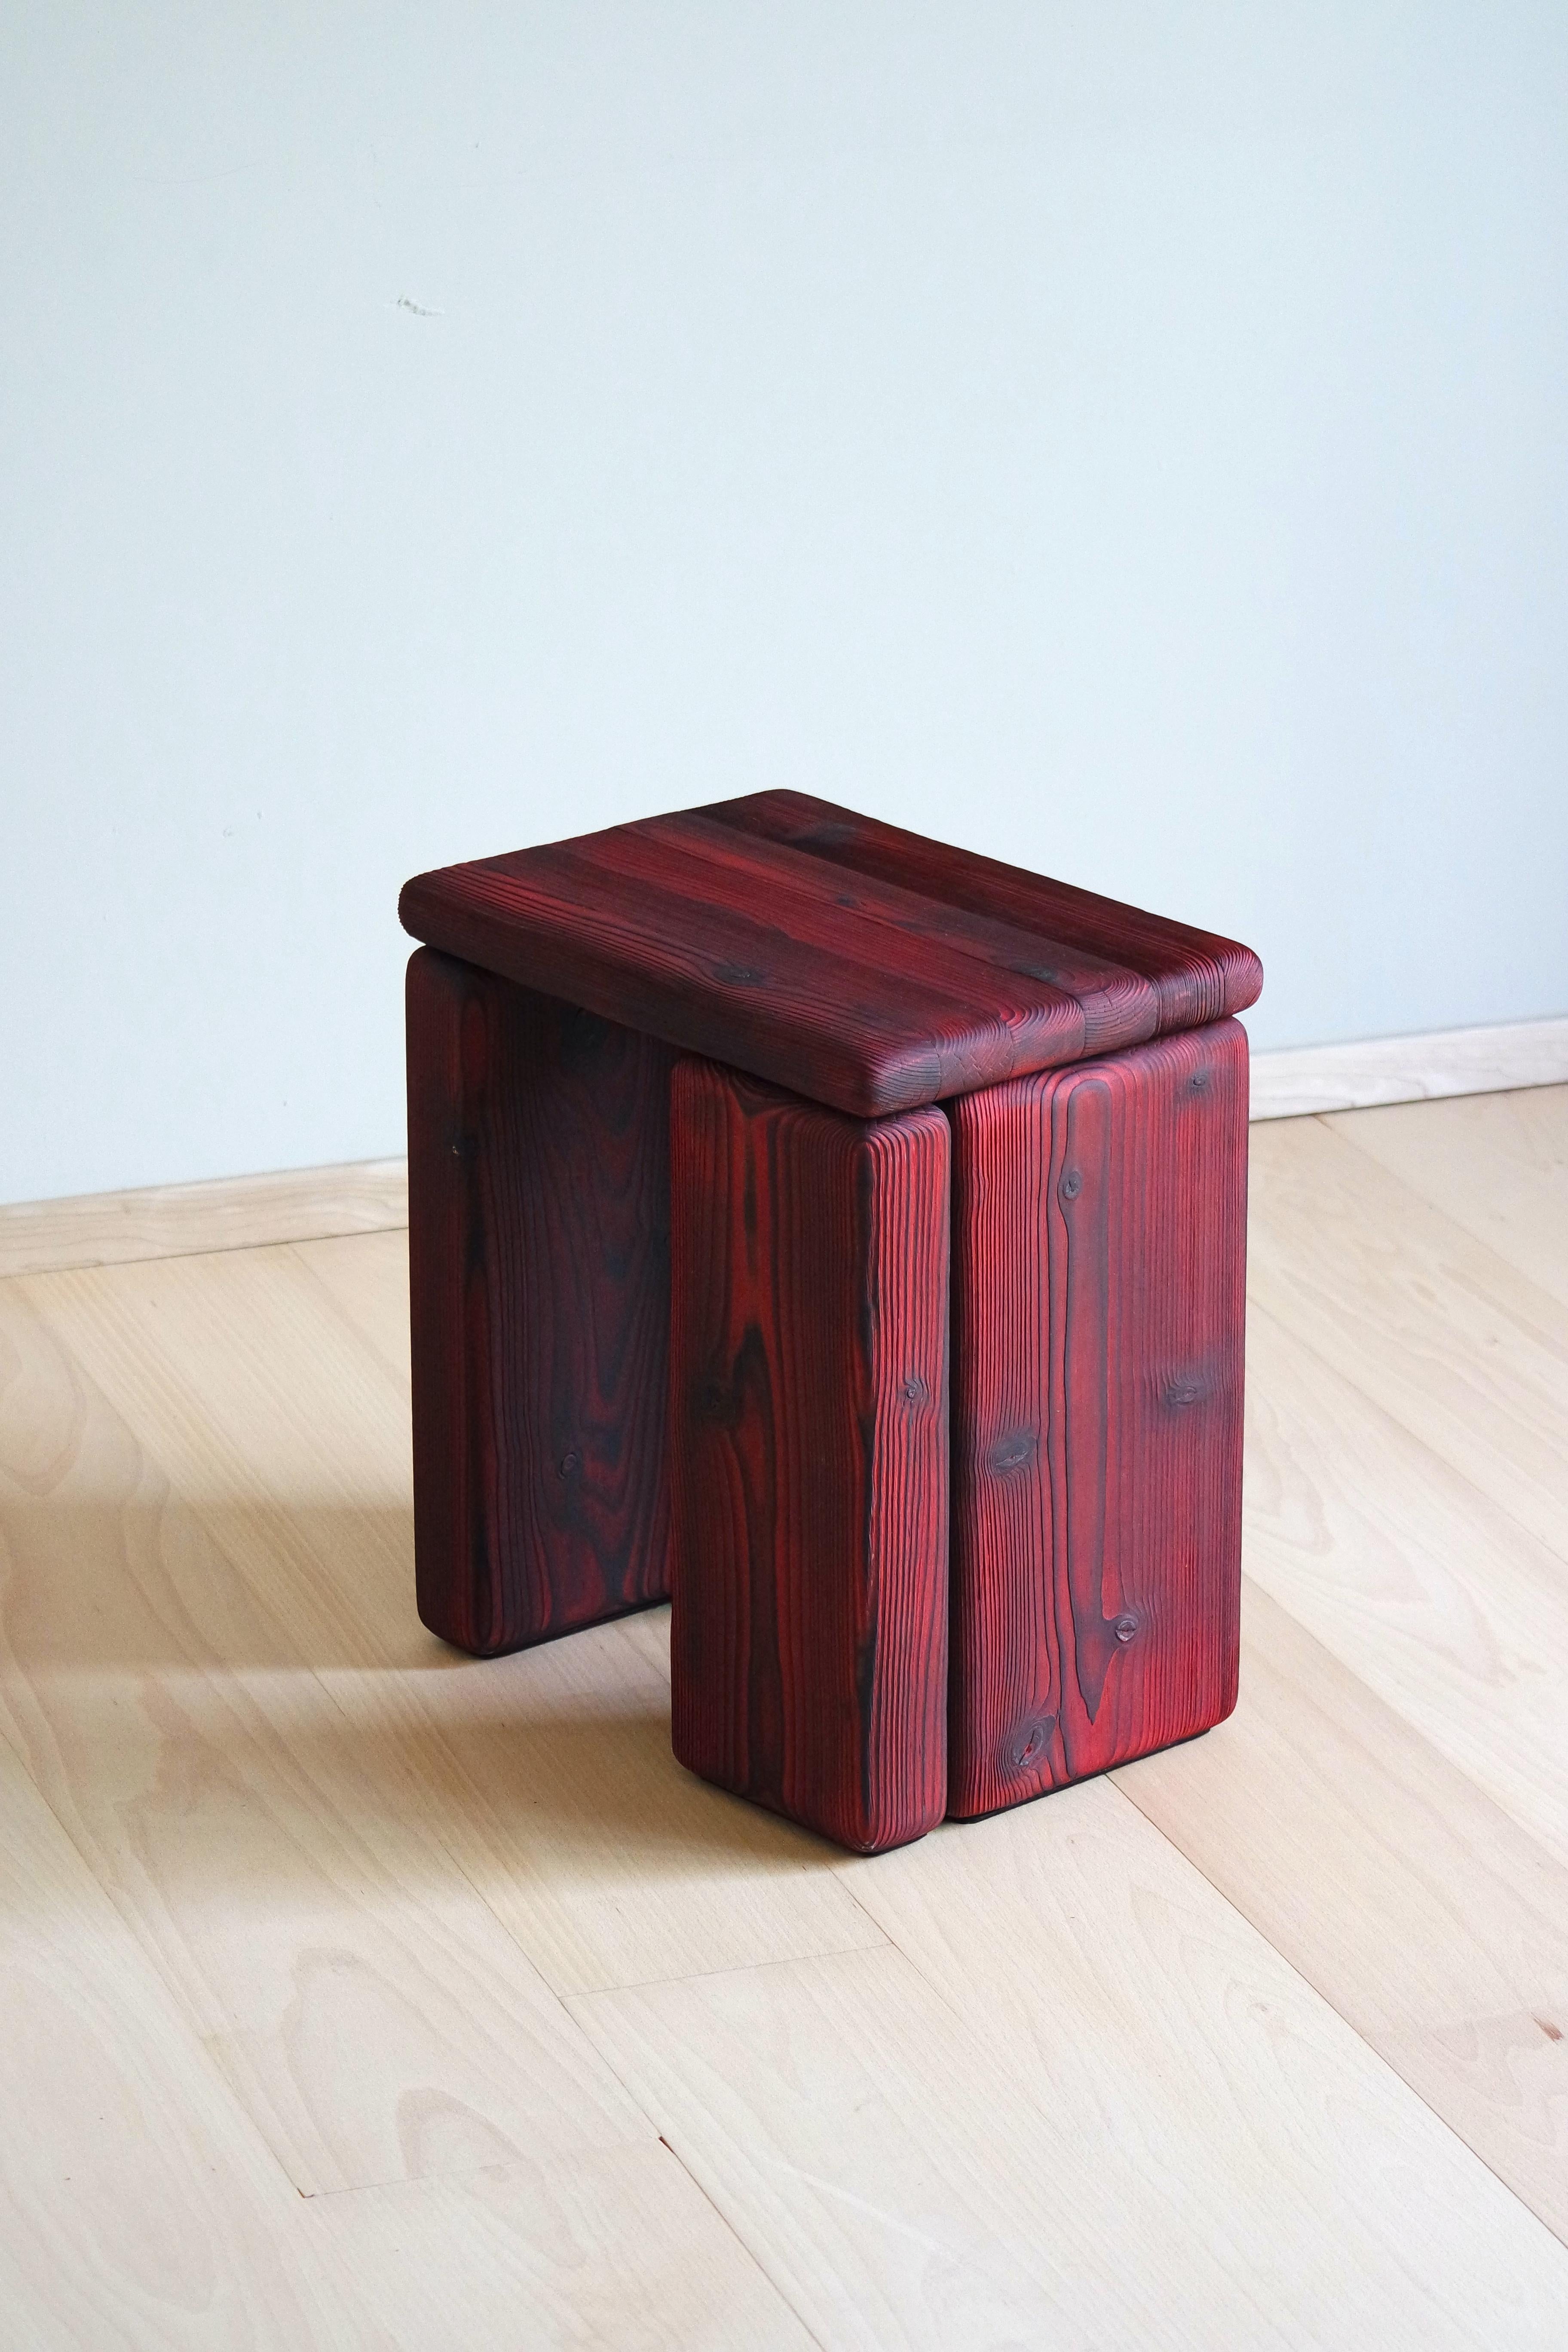 Timber Stool Burned Pine by Onno Adriaanse
Signed and numbered
Dimensions: D 40 x W 29 x H 45 cm
Materials: Burned pine, colored linseed oil
Also available in Color: Indigo blue, purple-red, uncolored wood, Maple, Burned Pine. More colors on